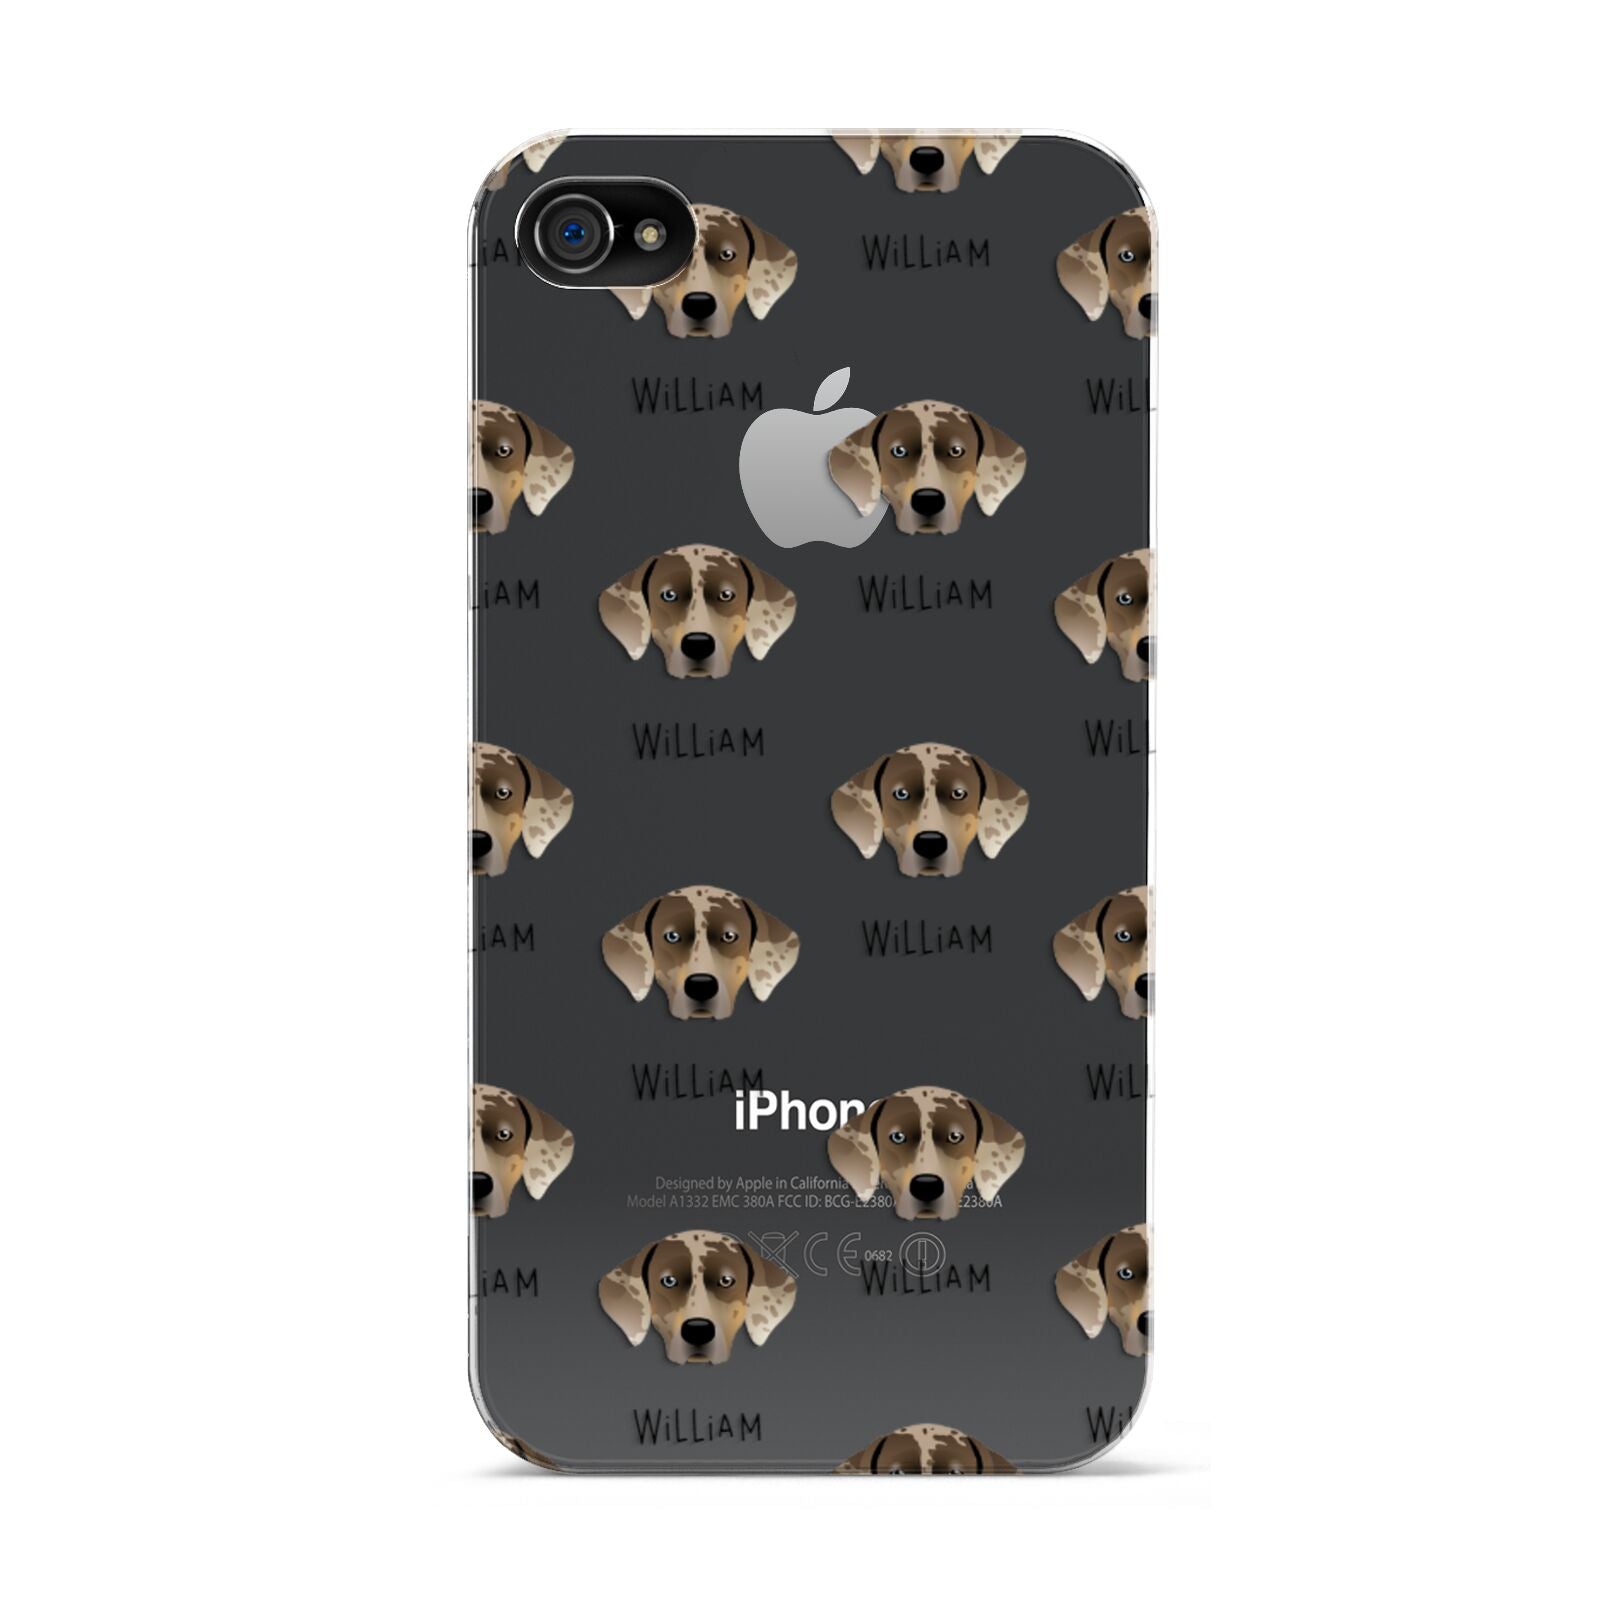 Catahoula Leopard Dog Icon with Name Apple iPhone 4s Case